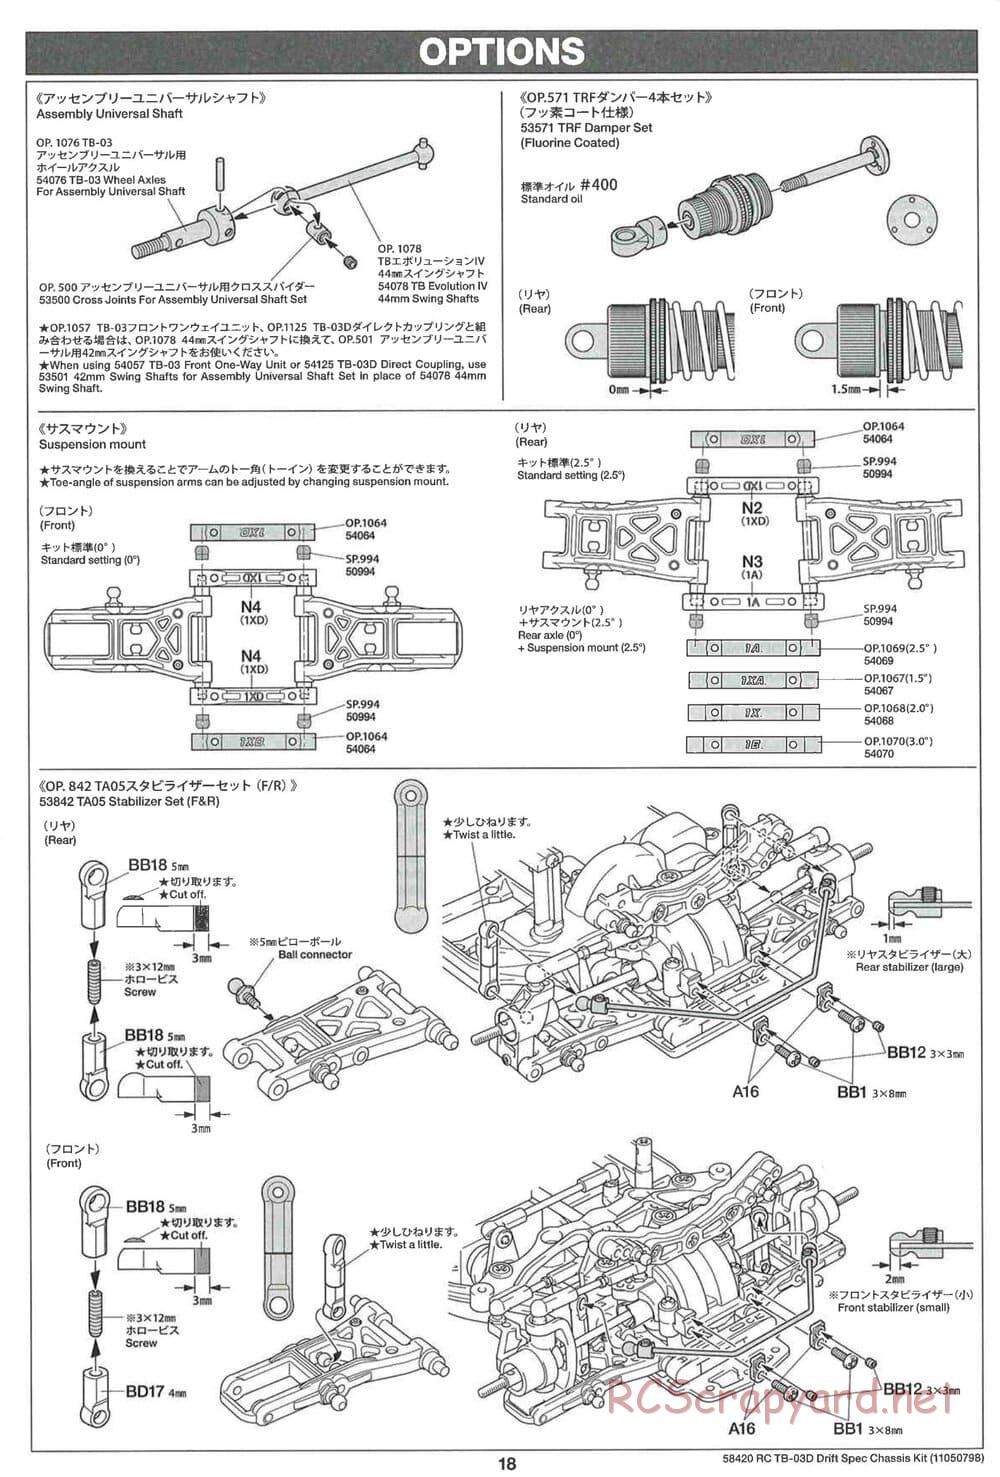 Tamiya - TB-03D HP Drift Spec Chassis - Manual - Page 18